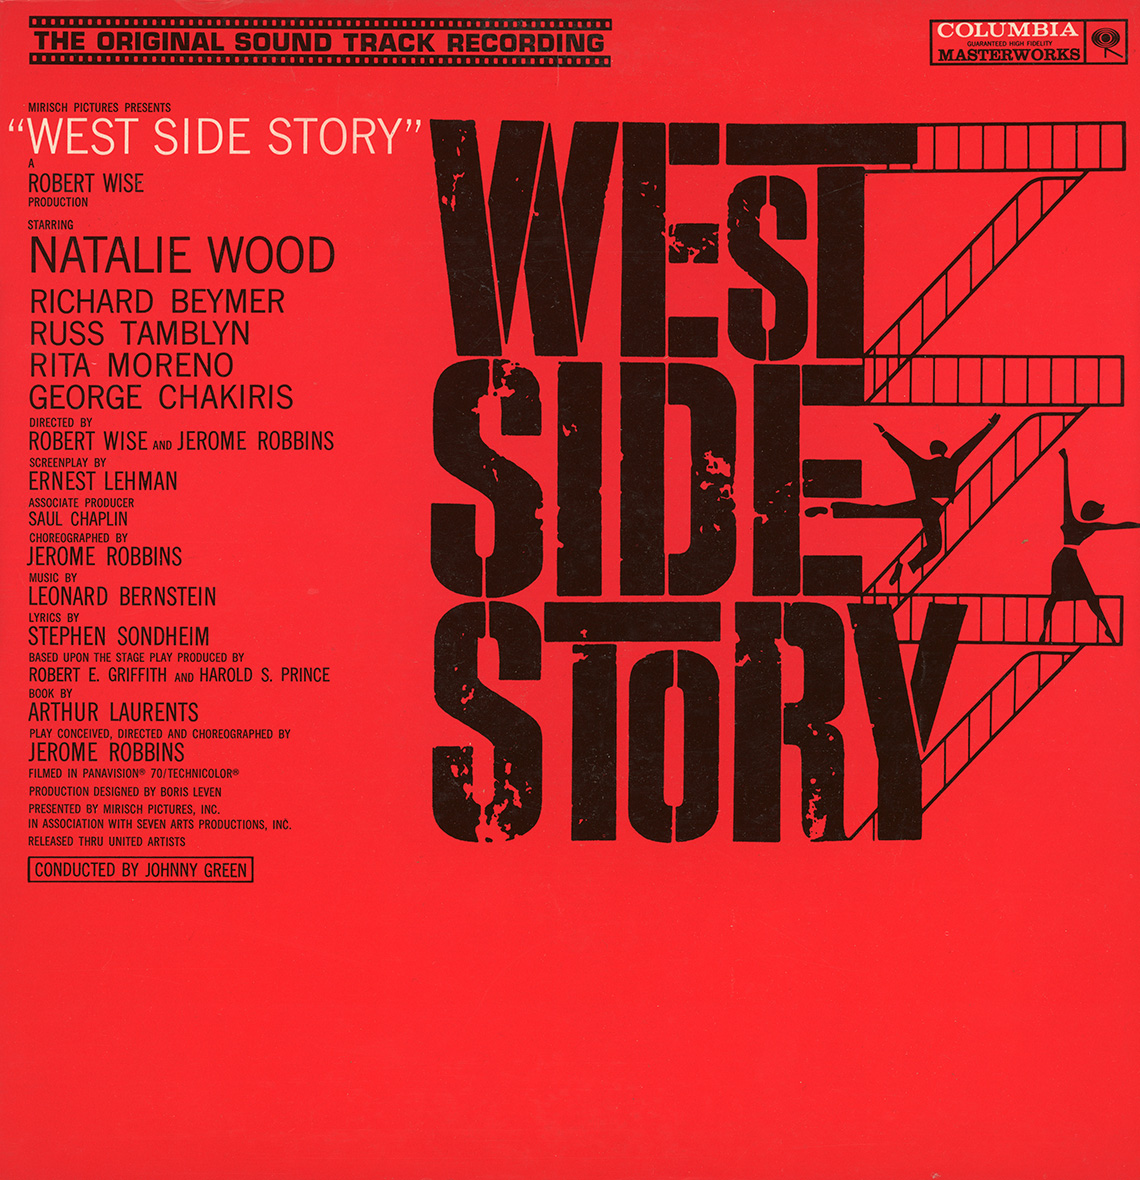 The album cover for the West Side Story soundtrack